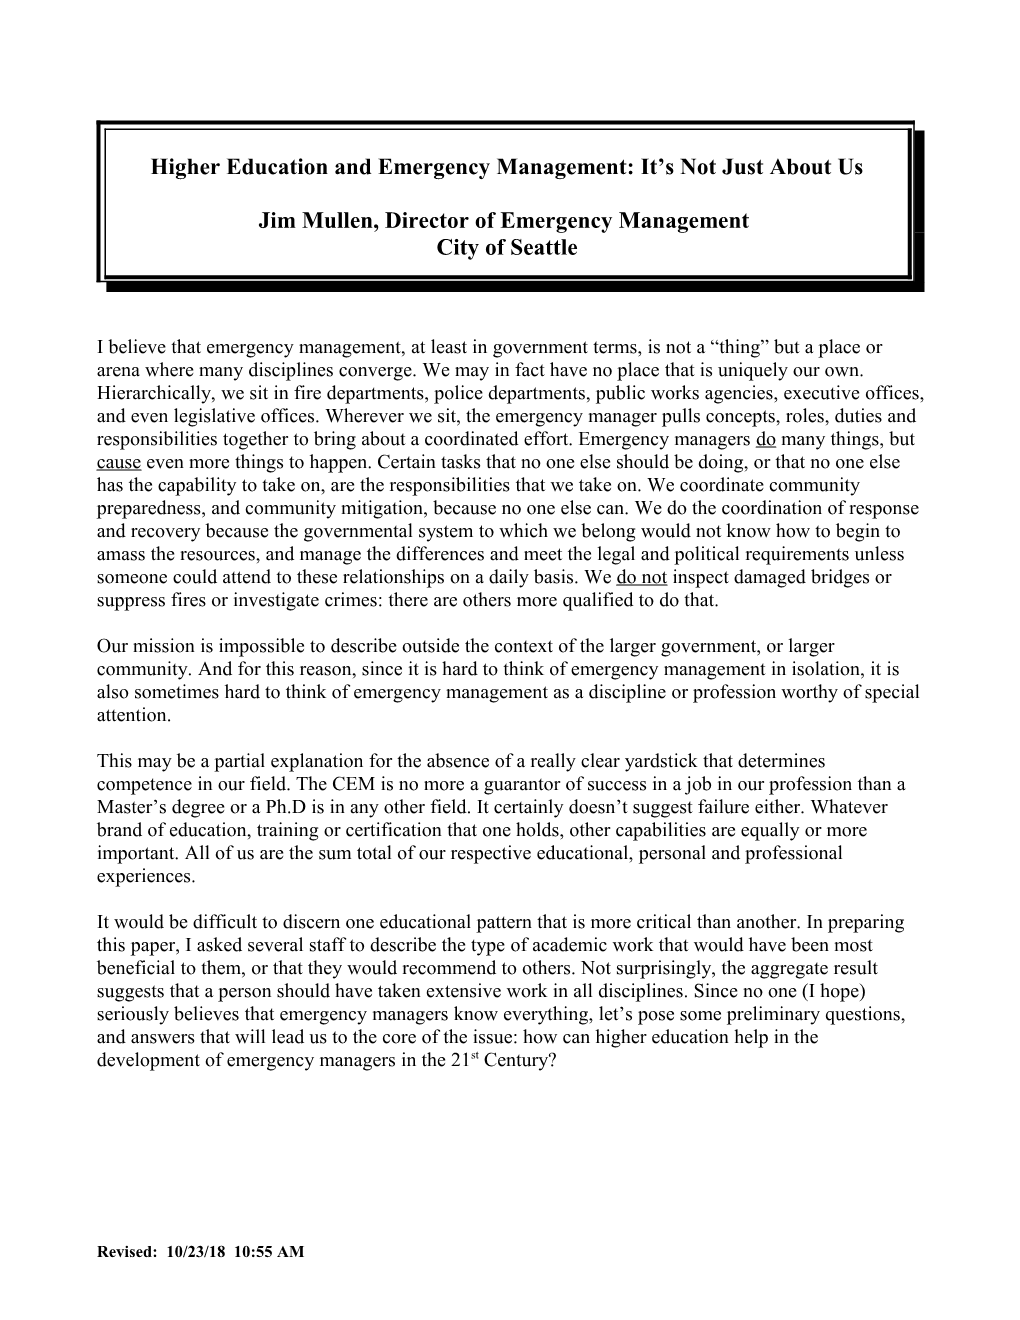 Notes for Higher Education Conference Paper